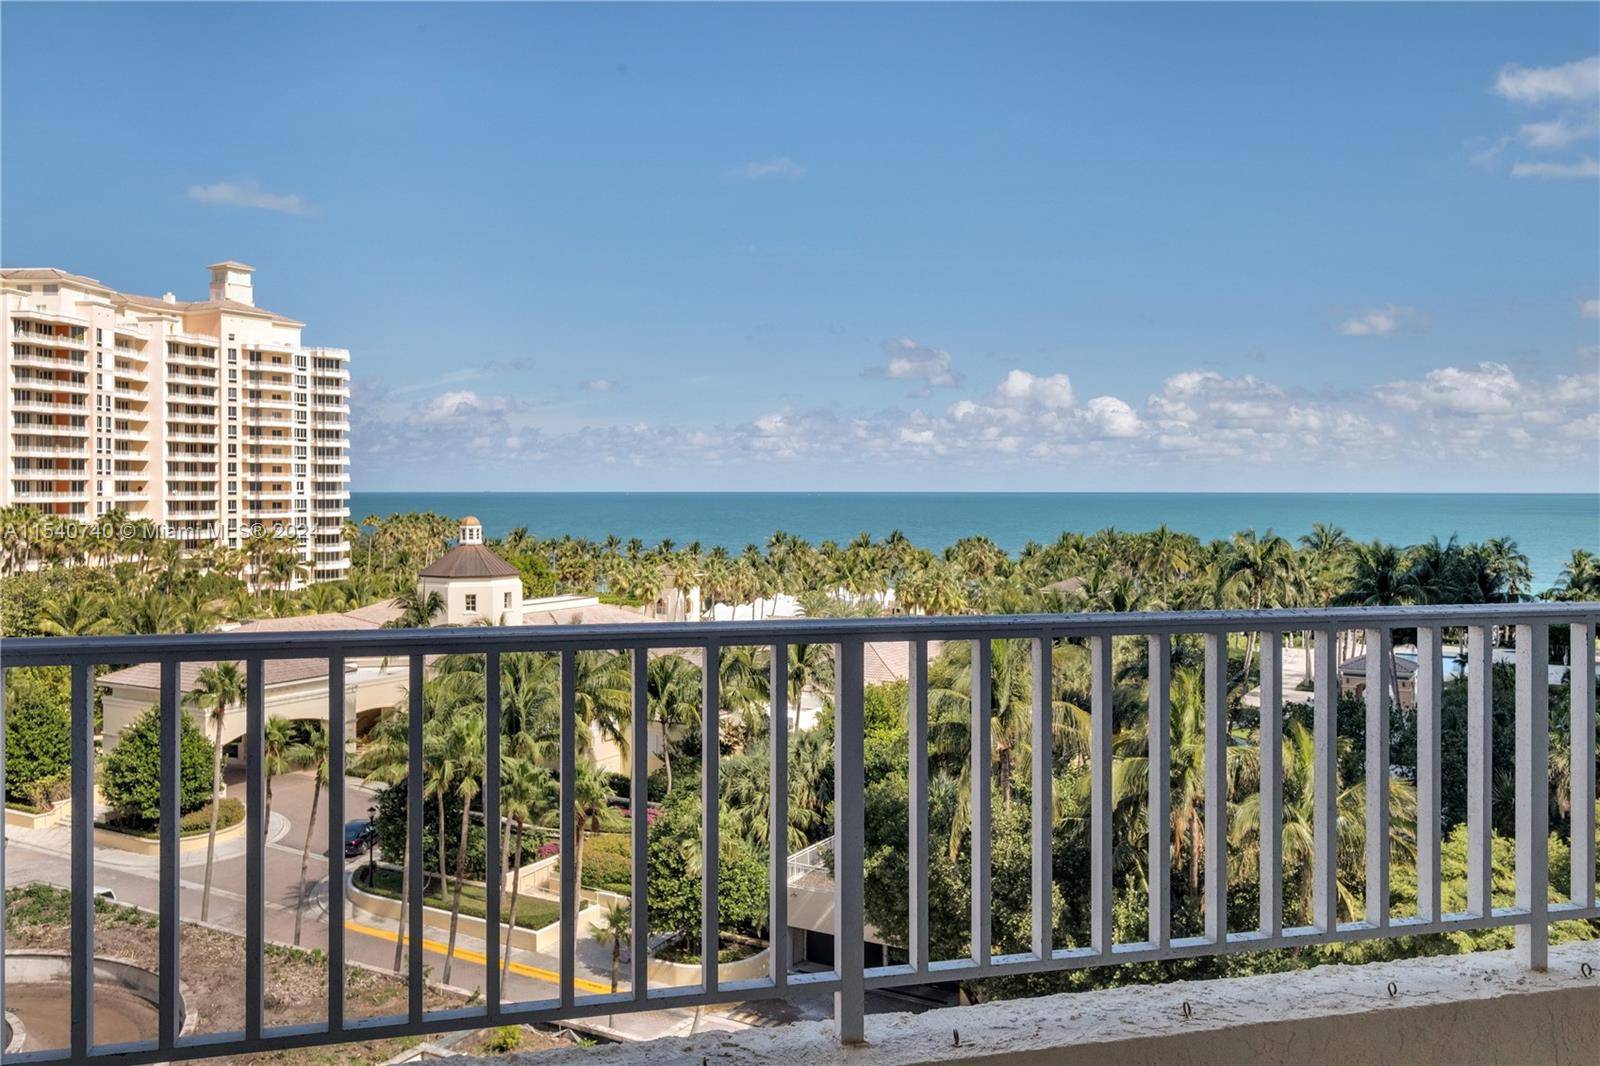 Enjoy our paradise found in this spacious oceanfront condo at the Ocean Club 5 star resort complex in Key Biscayne.